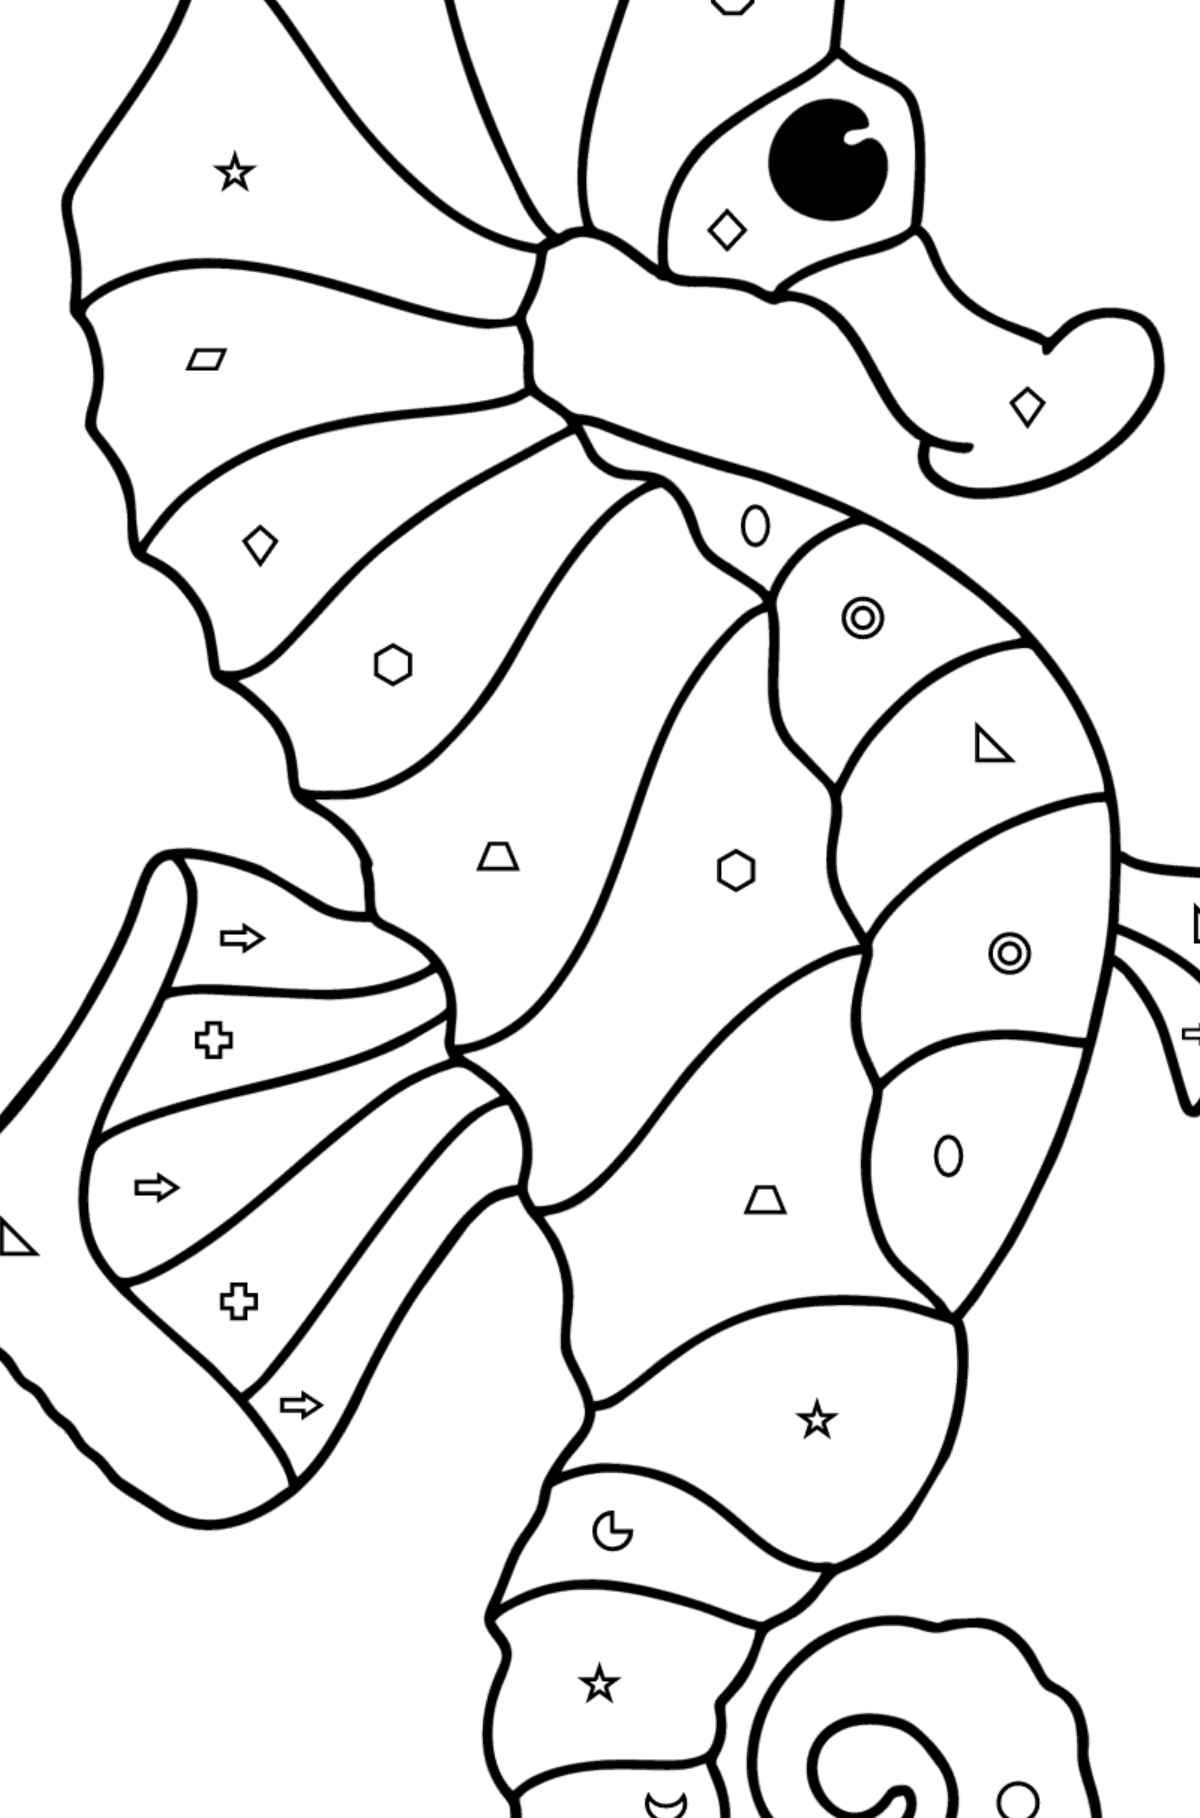 Sea Horse coloring page - Coloring by Geometric Shapes for Kids